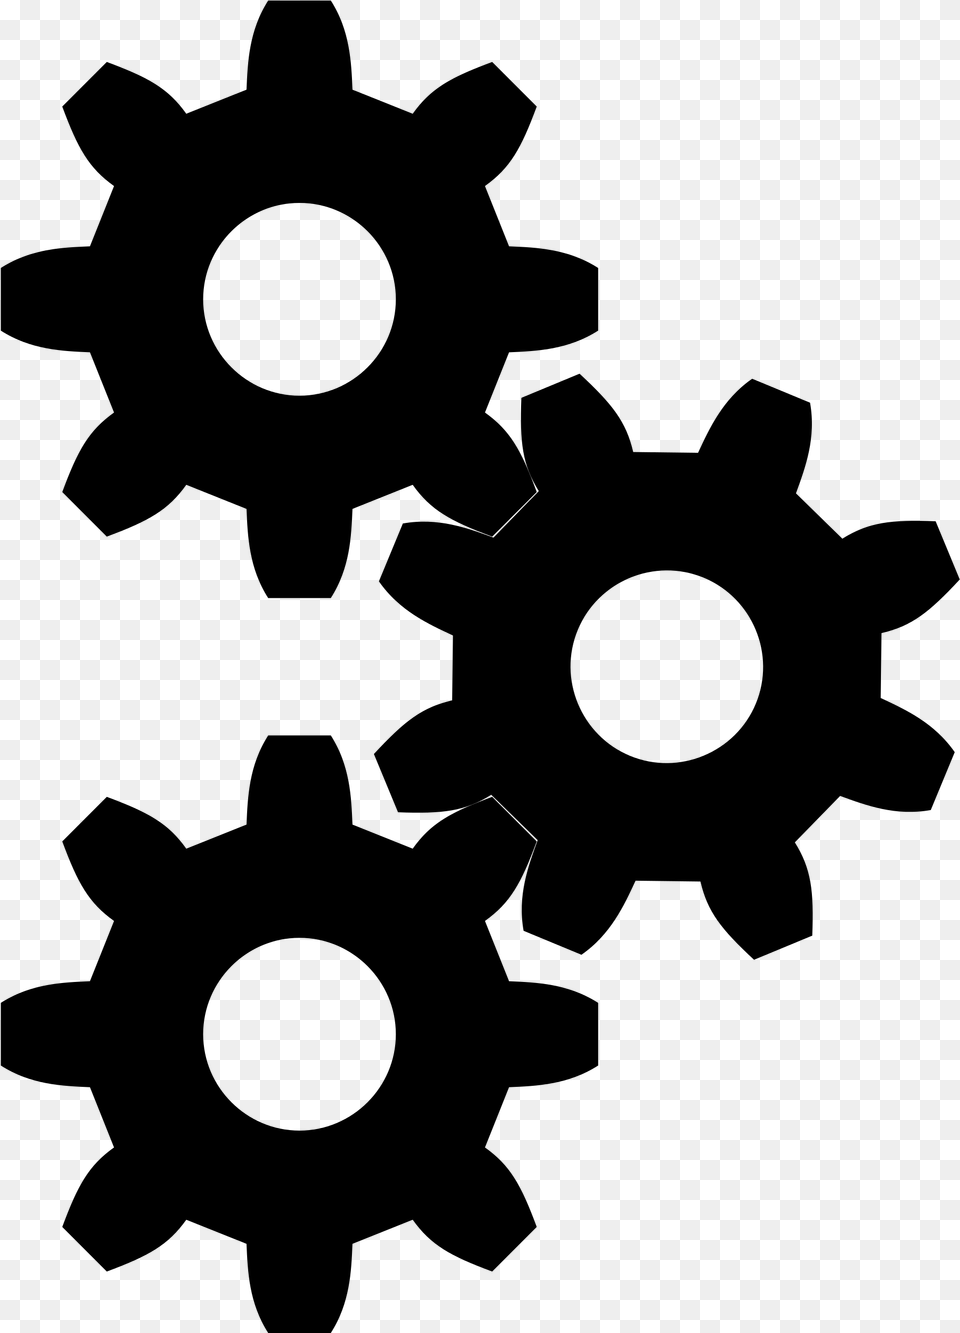 Black Gears Graphic Black And White Download Cog Icon, Gray Png